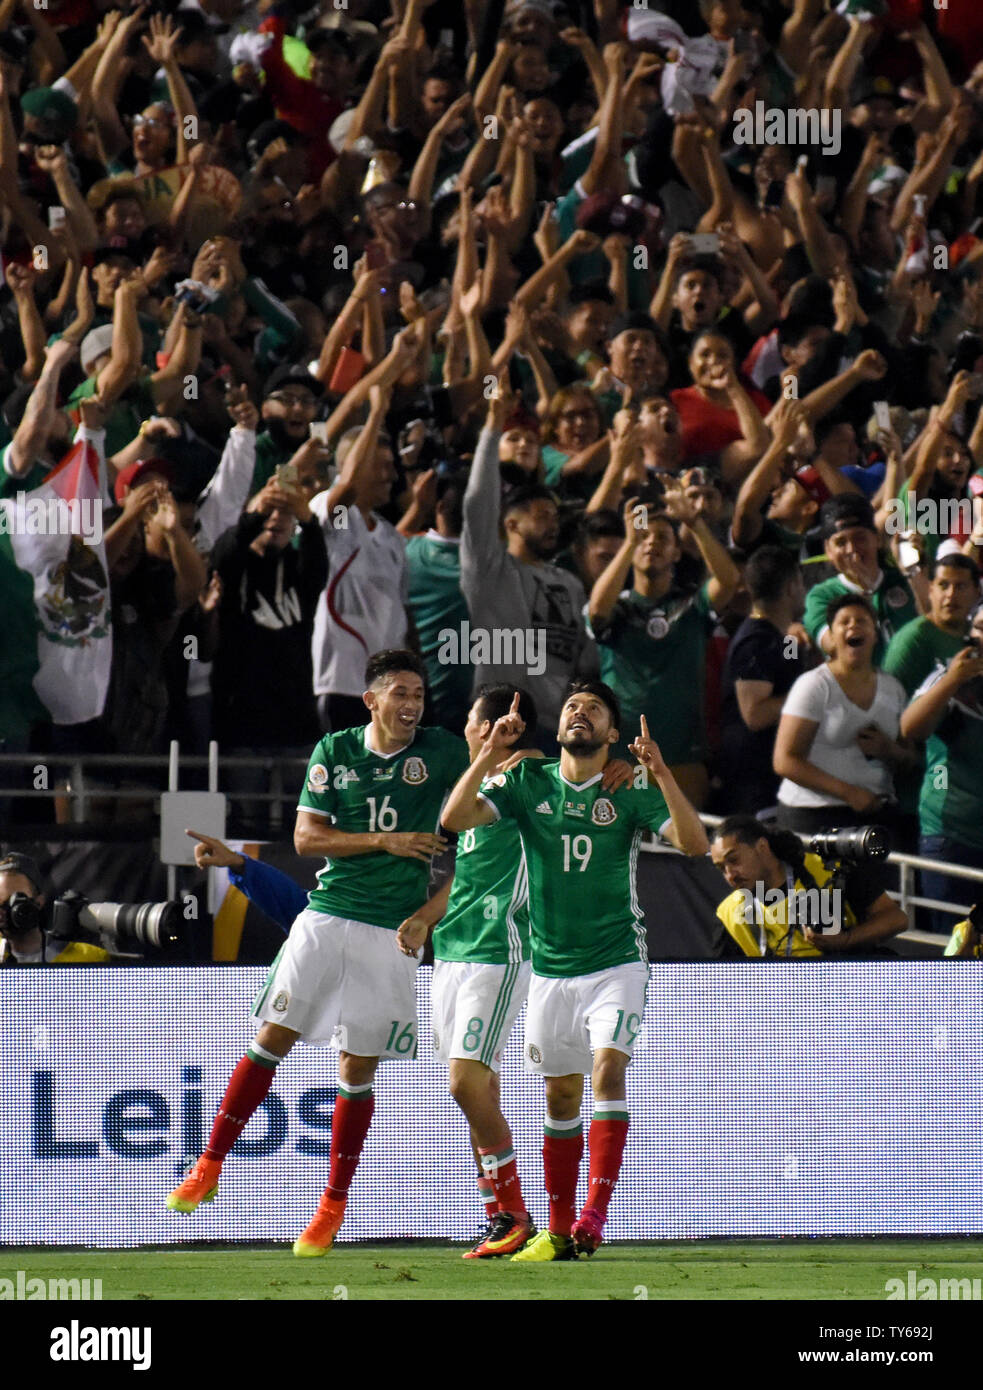 Mexico forward Oribe Peralta (19) celebrates with teammates Hector Herrera (16) and forward Hirving Lozano, center, after Peralta's score against Jamaica during the second half of a 2016 Copa America Centenario Group A match at the Rose Bowl in Pasadena, California, on June 9, 2016. Mexico defeated Jamaica 2-0. Photo by Michael Owen Baker/UPI Stock Photo